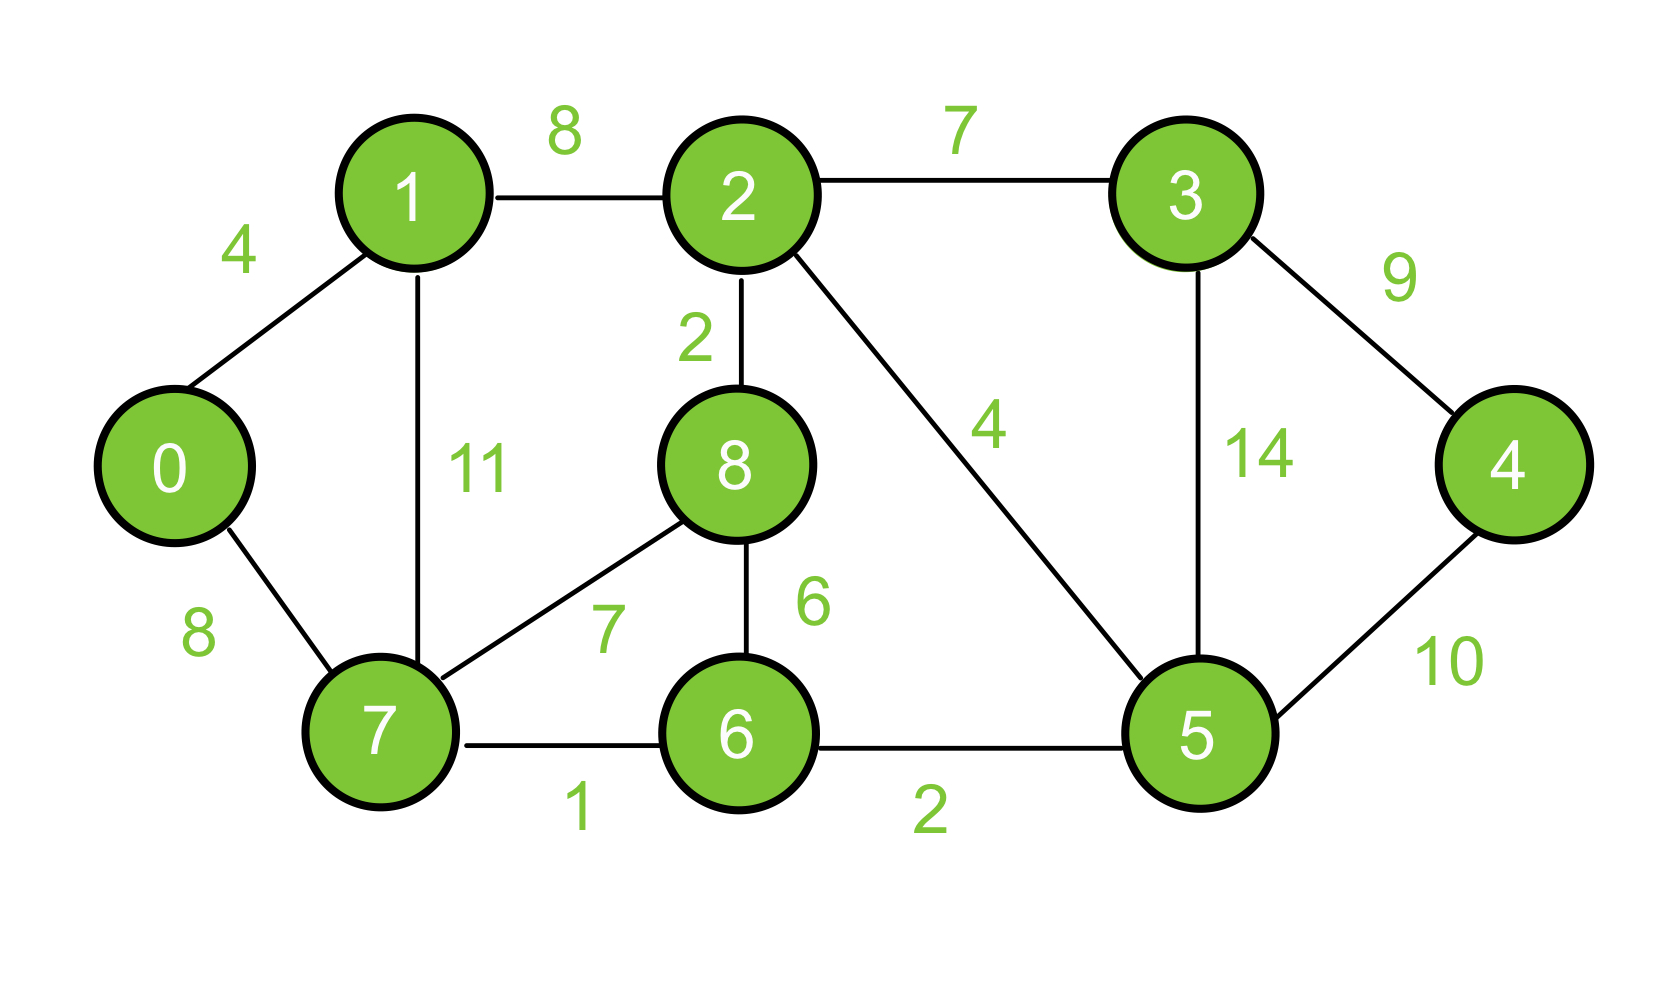 A graph with nodes and directed edges, visualizing the process of Dijkstra's shortest path algorithm from node A to other nodes, highlighting the
        the visited nodes and the shortest path found.